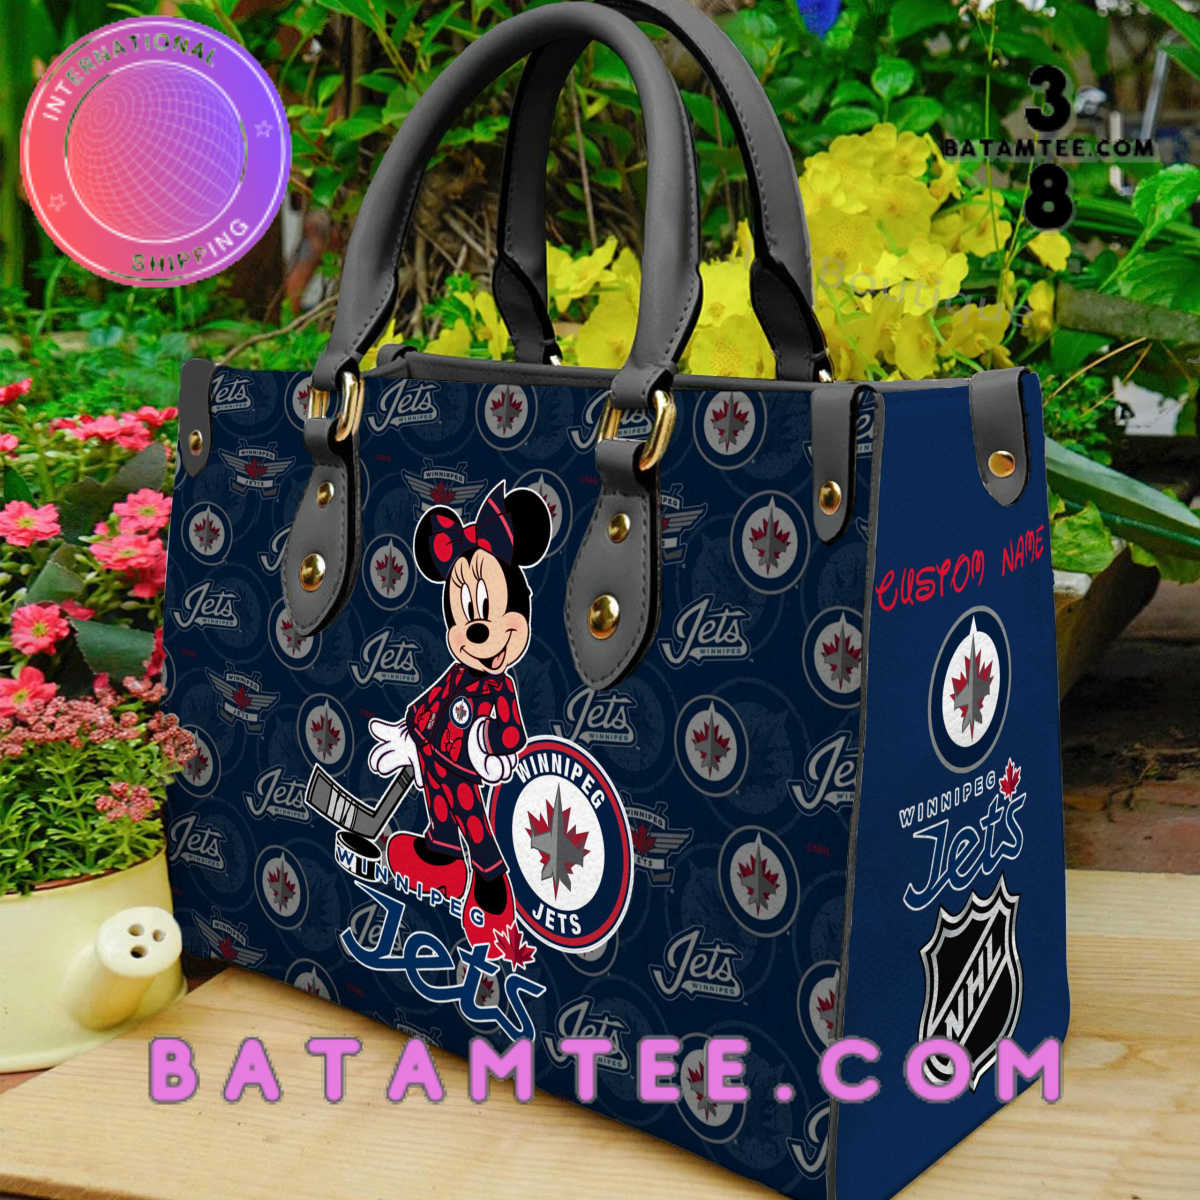 Winnipeg Jets Minnie Mouse Women Leather Hand Bag's Overview - Batamtee Shop - Threads & Totes: Your Style Destination